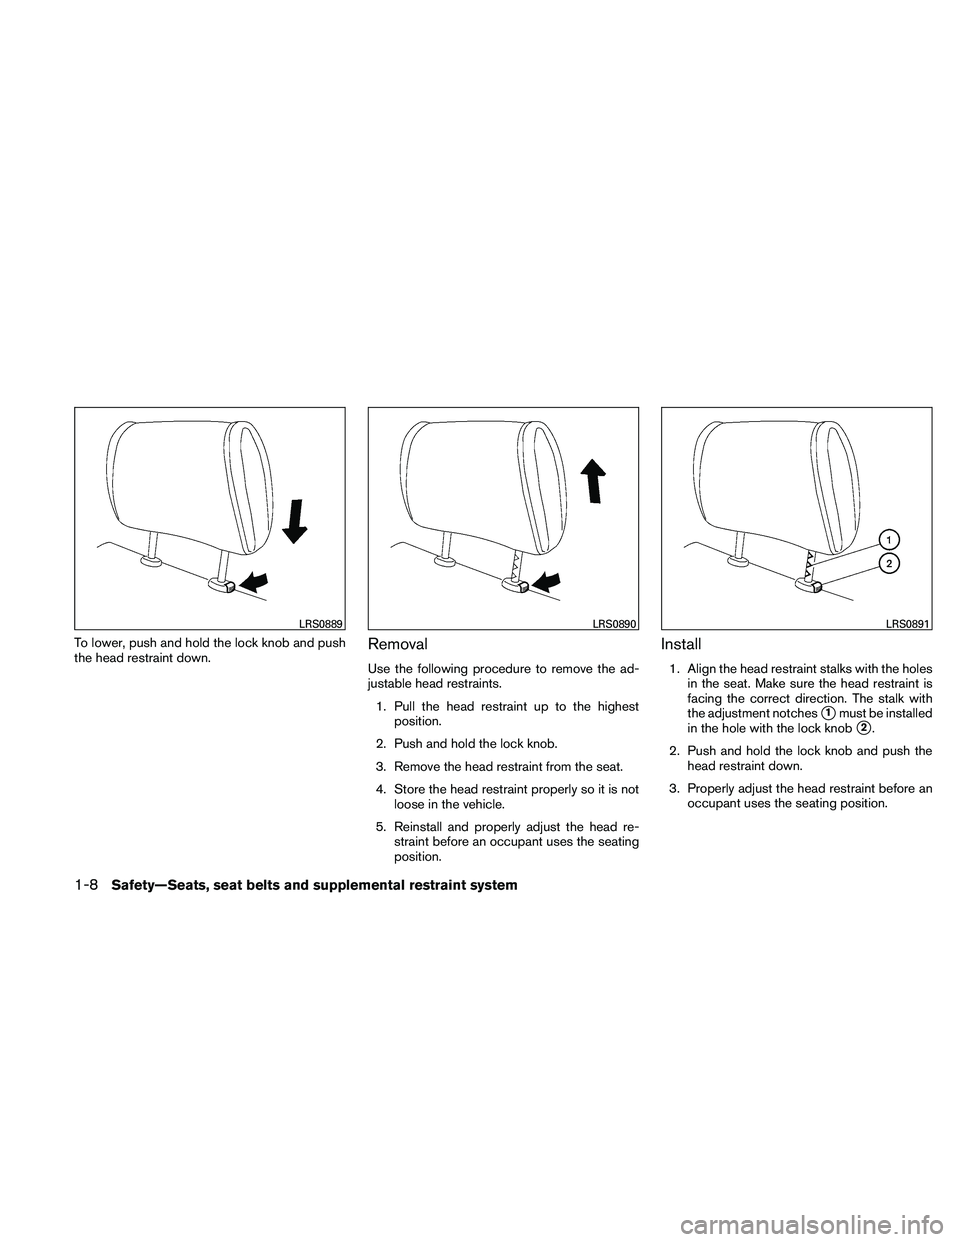 NISSAN FRONTIER 2011  Owner´s Manual To lower, push and hold the lock knob and push
the head restraint down.Removal
Use the following procedure to remove the ad-
justable head restraints.1. Pull the head restraint up to the highest posit